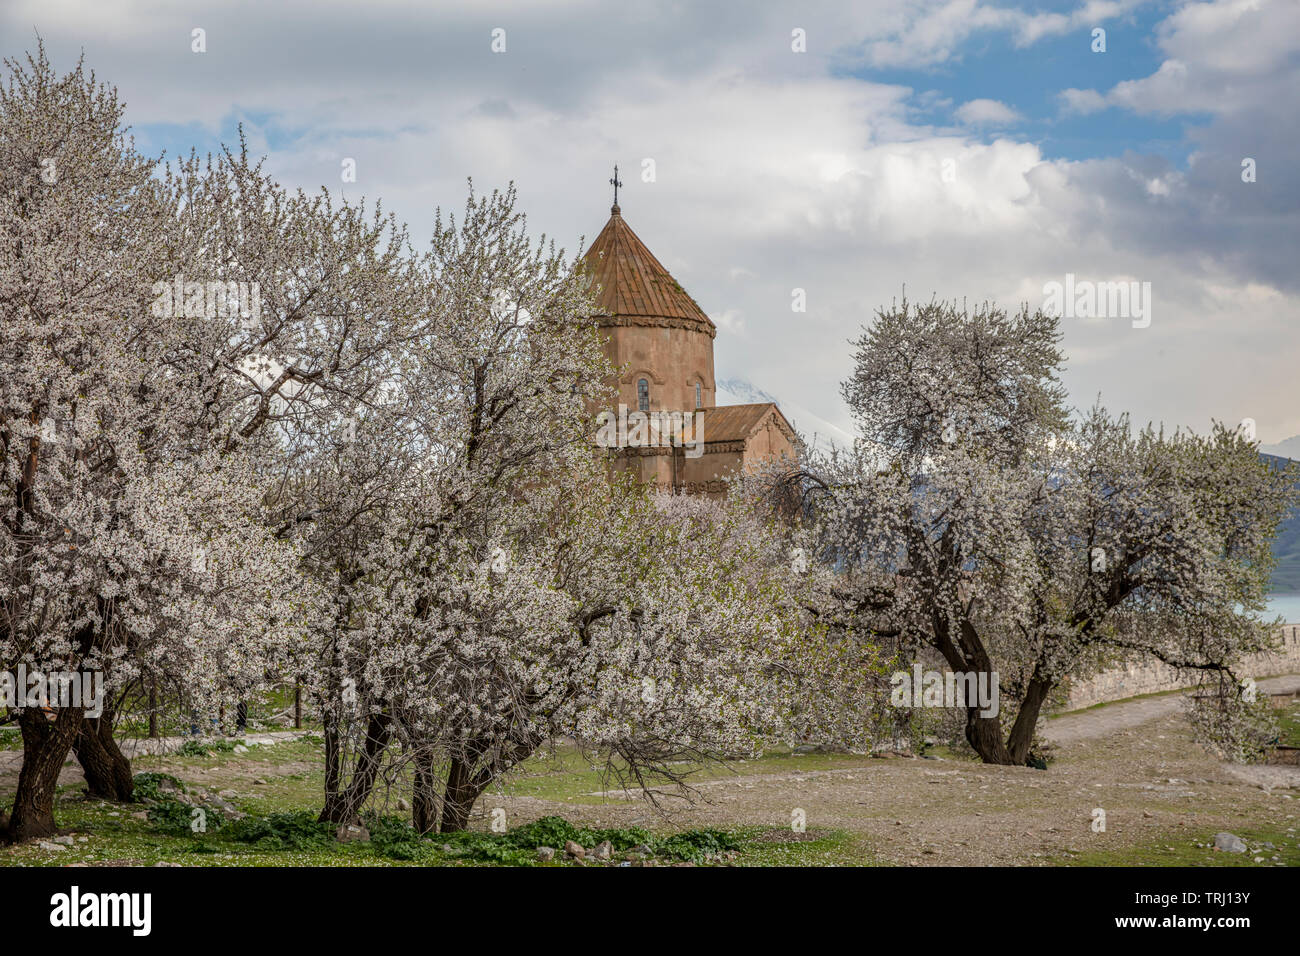 Amazing spring view of Armenian Church of the Holy Cross on Akdamar Island (Akdamar Adasi), Lake Van/Turkey. Surrounded by tree in blossom, in a middl Stock Photo